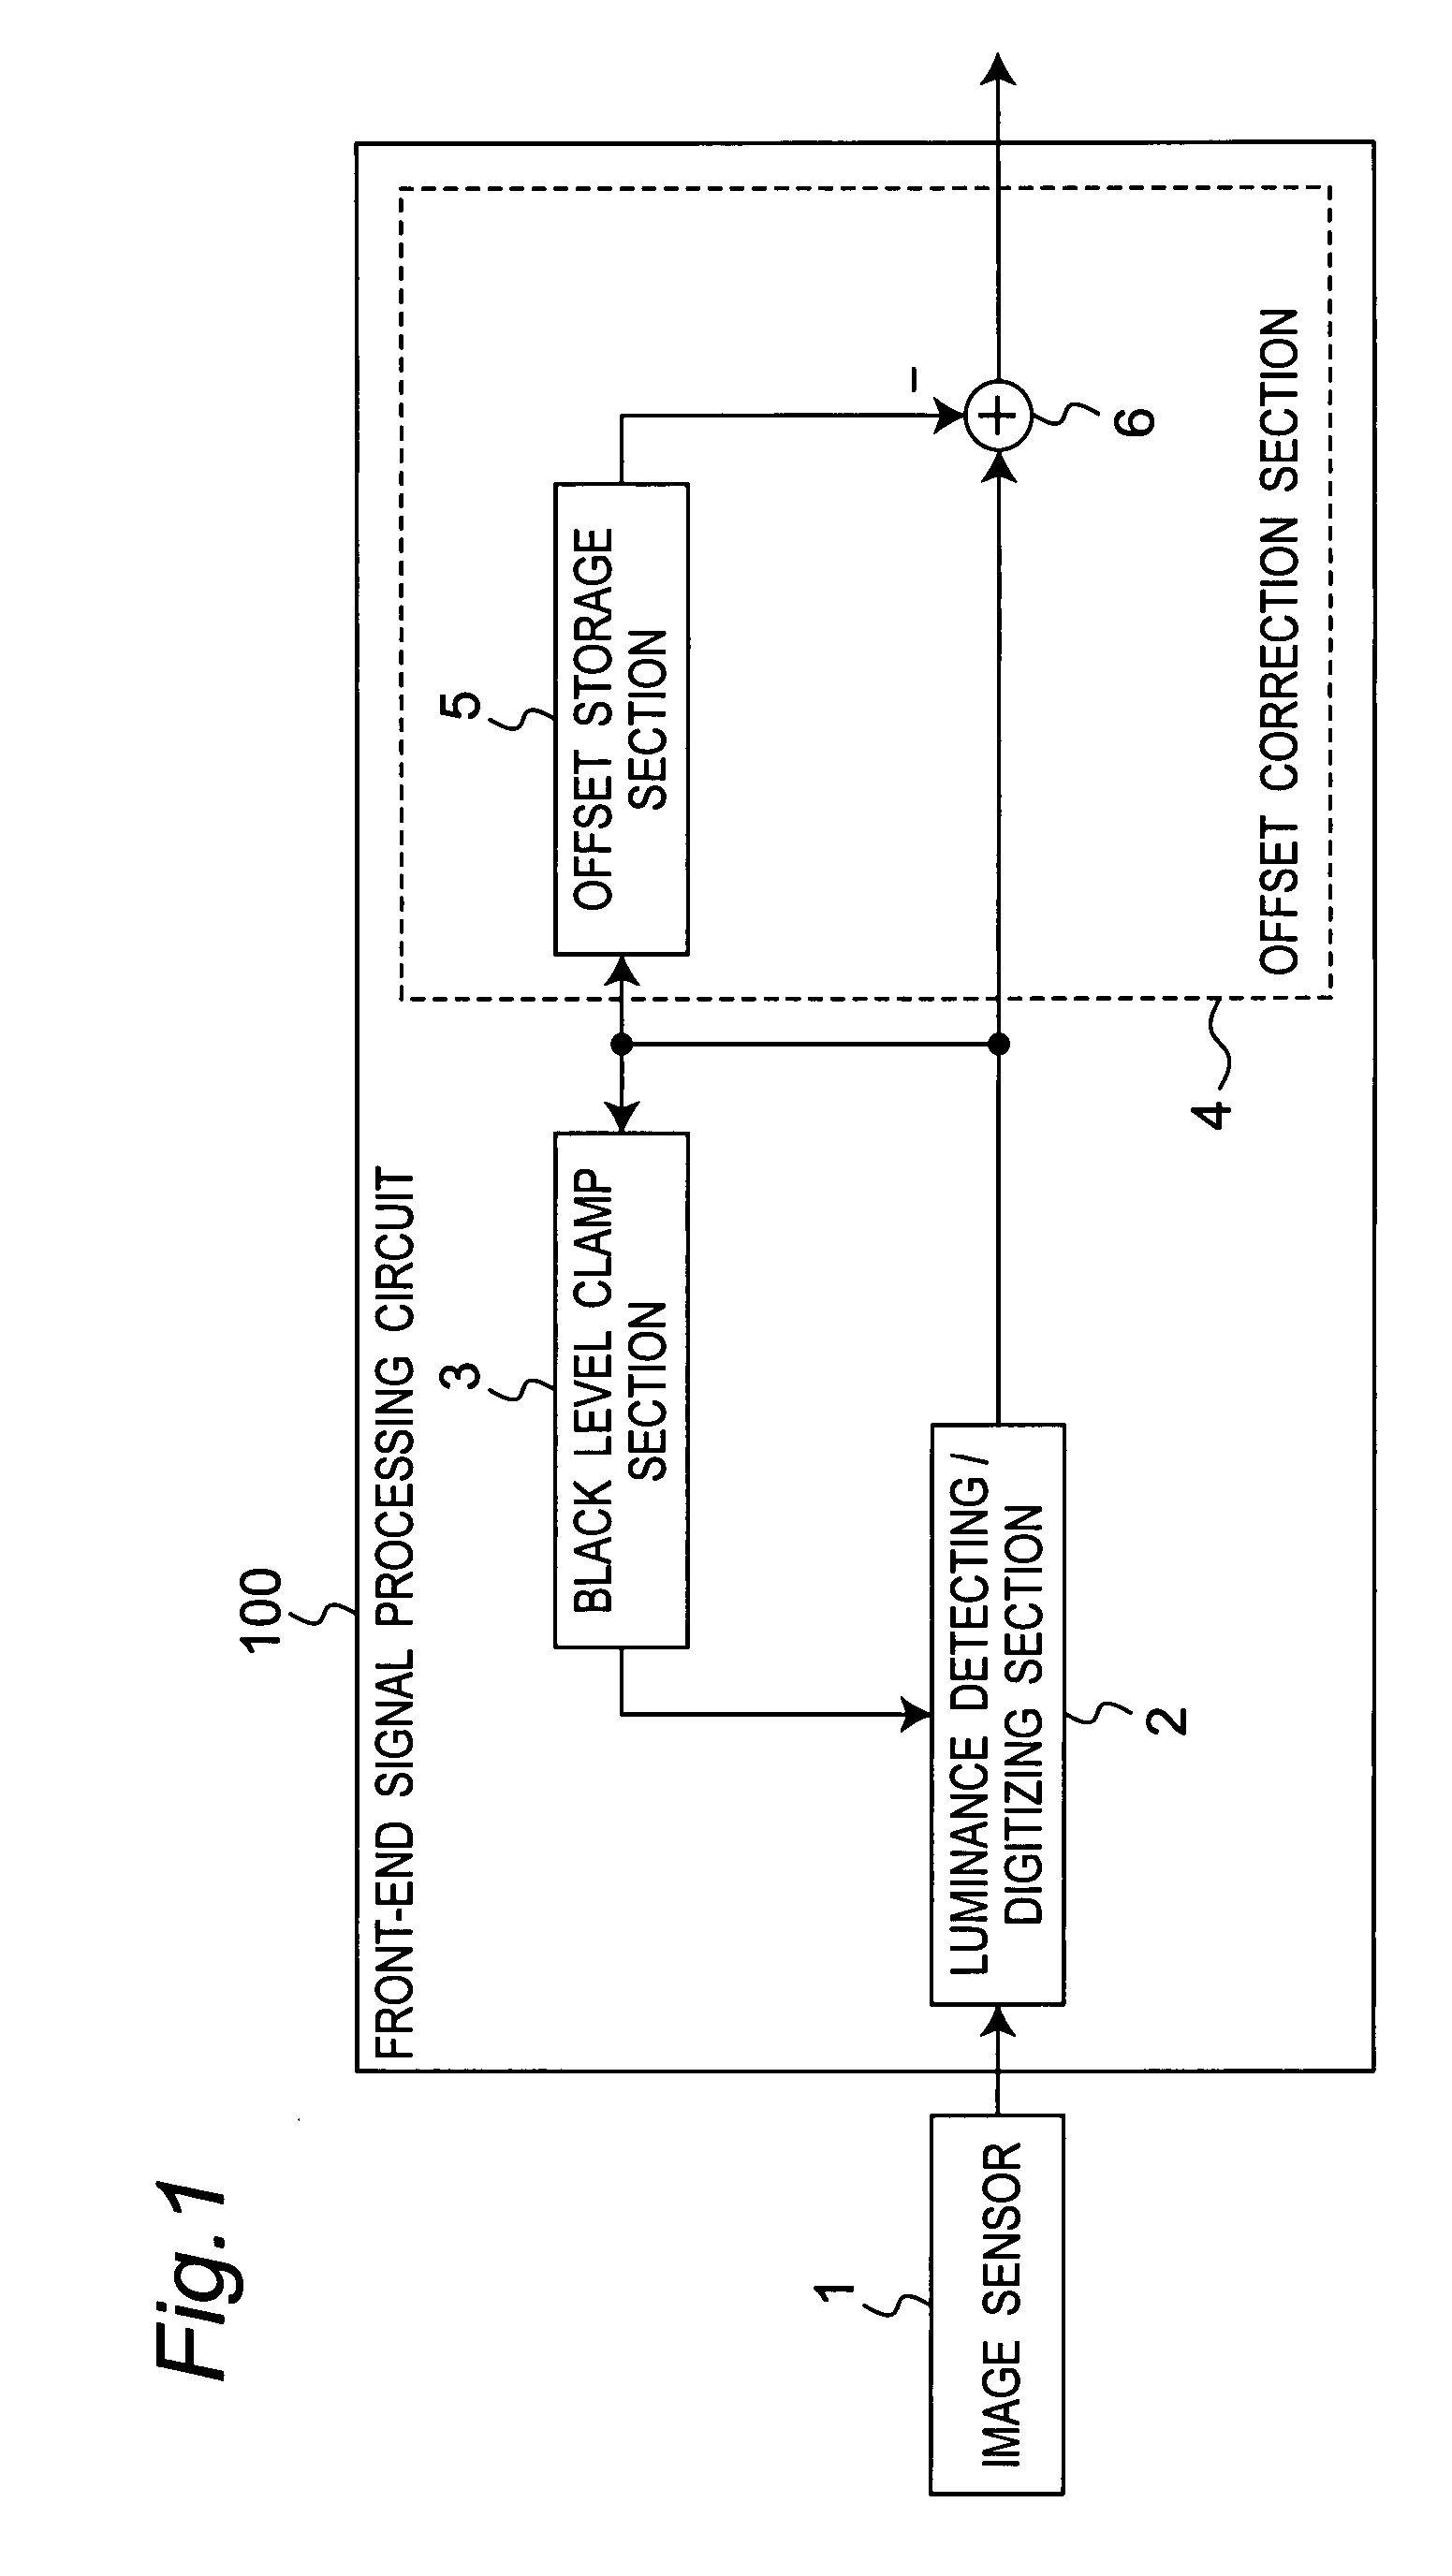 Front-end signal processing circuit and imaging device